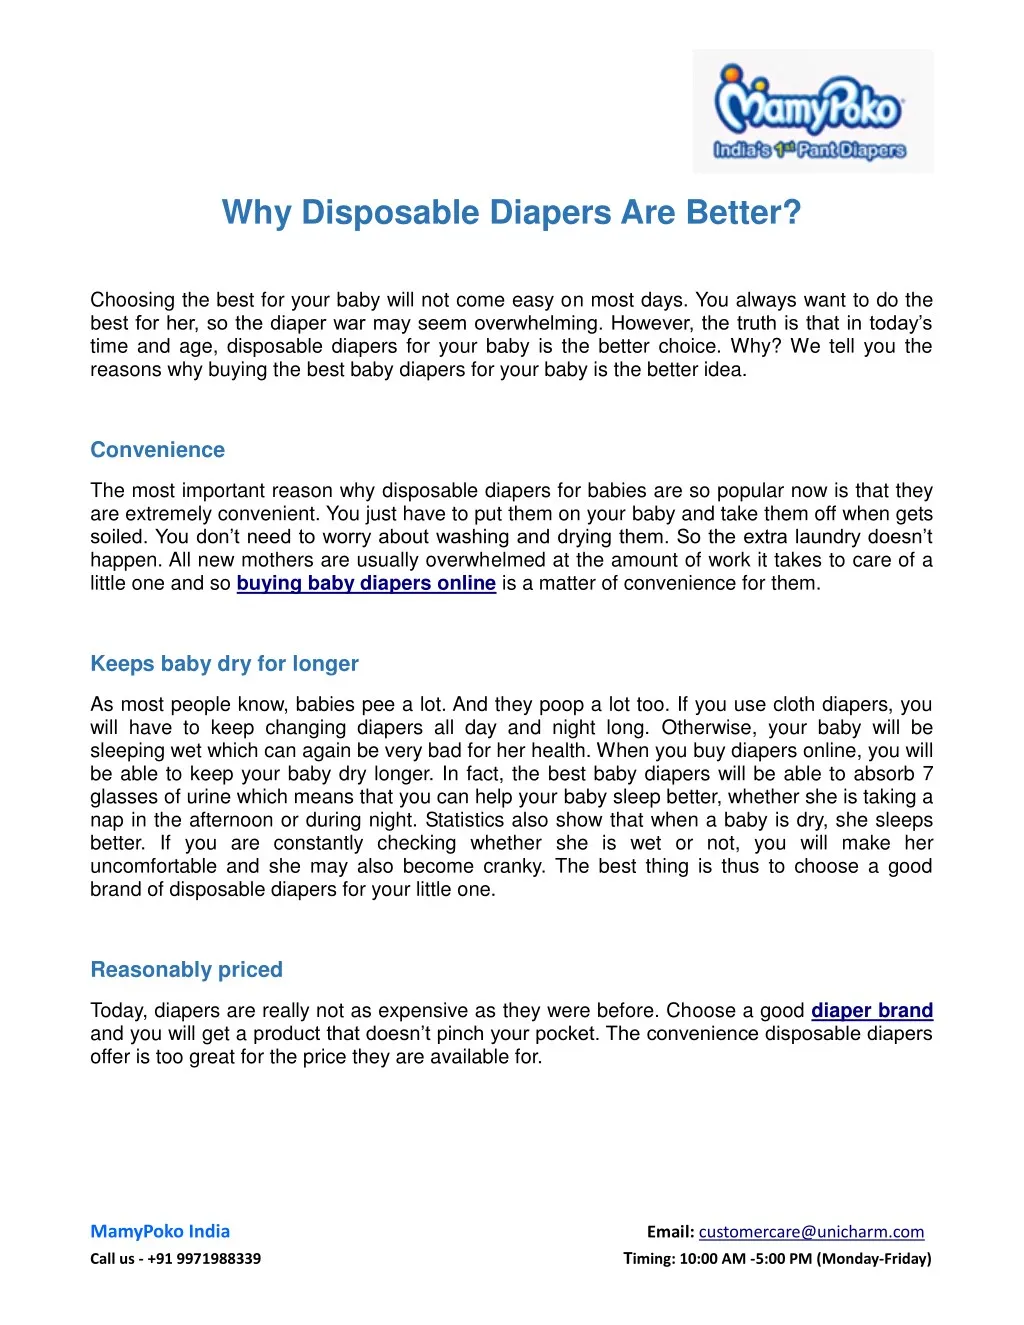 why disposable diapers are better